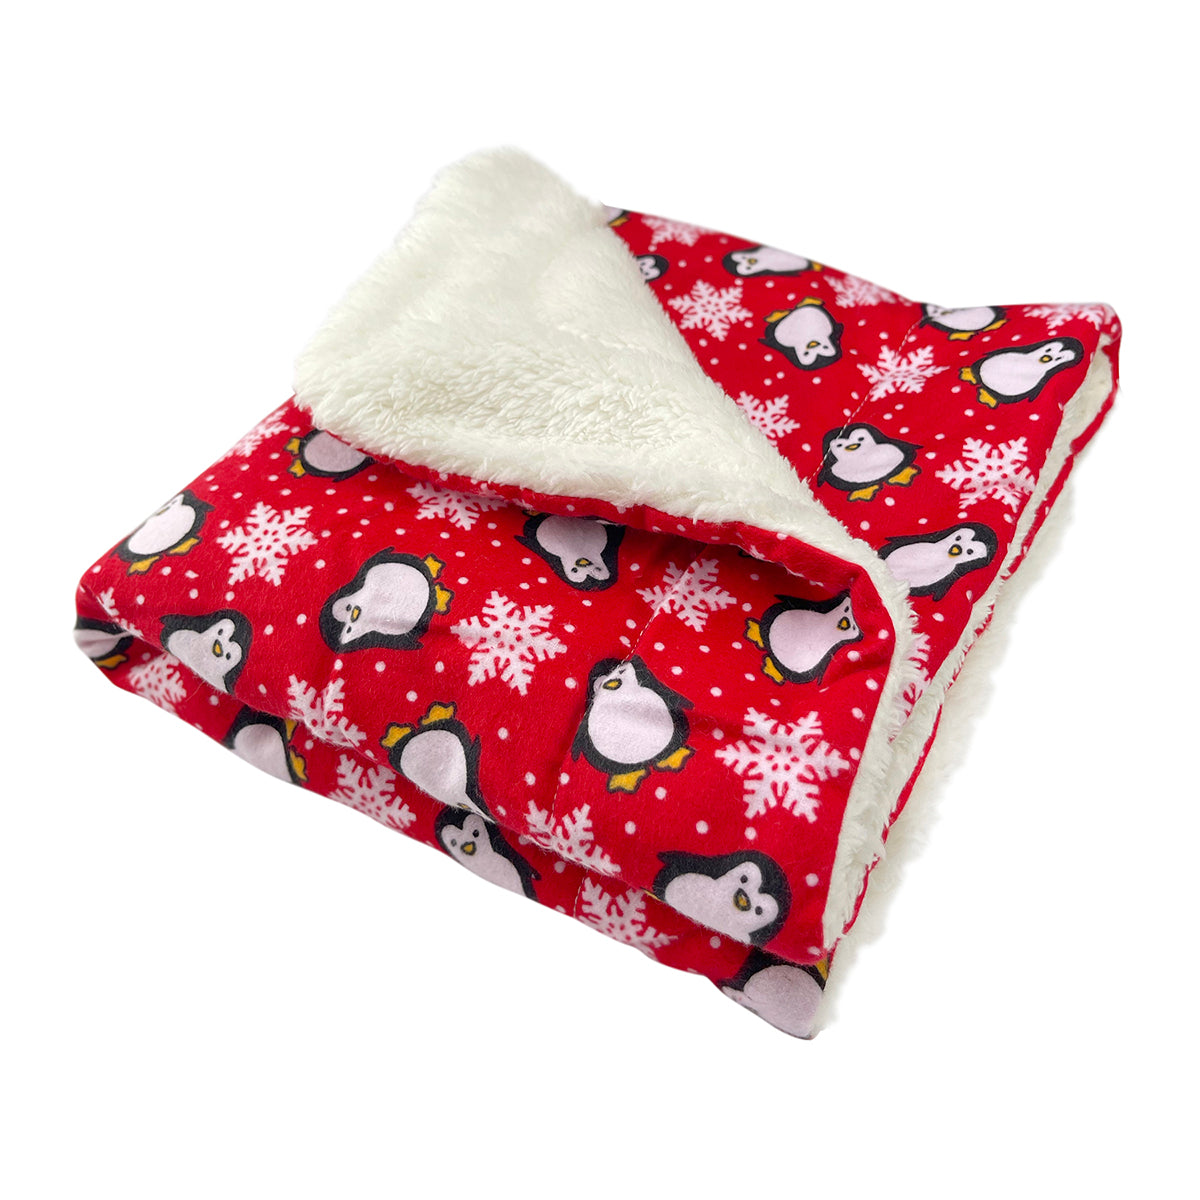 Double Layered Penguins & Snowflakes Flannel/Ultra-Plush Blanket - Red